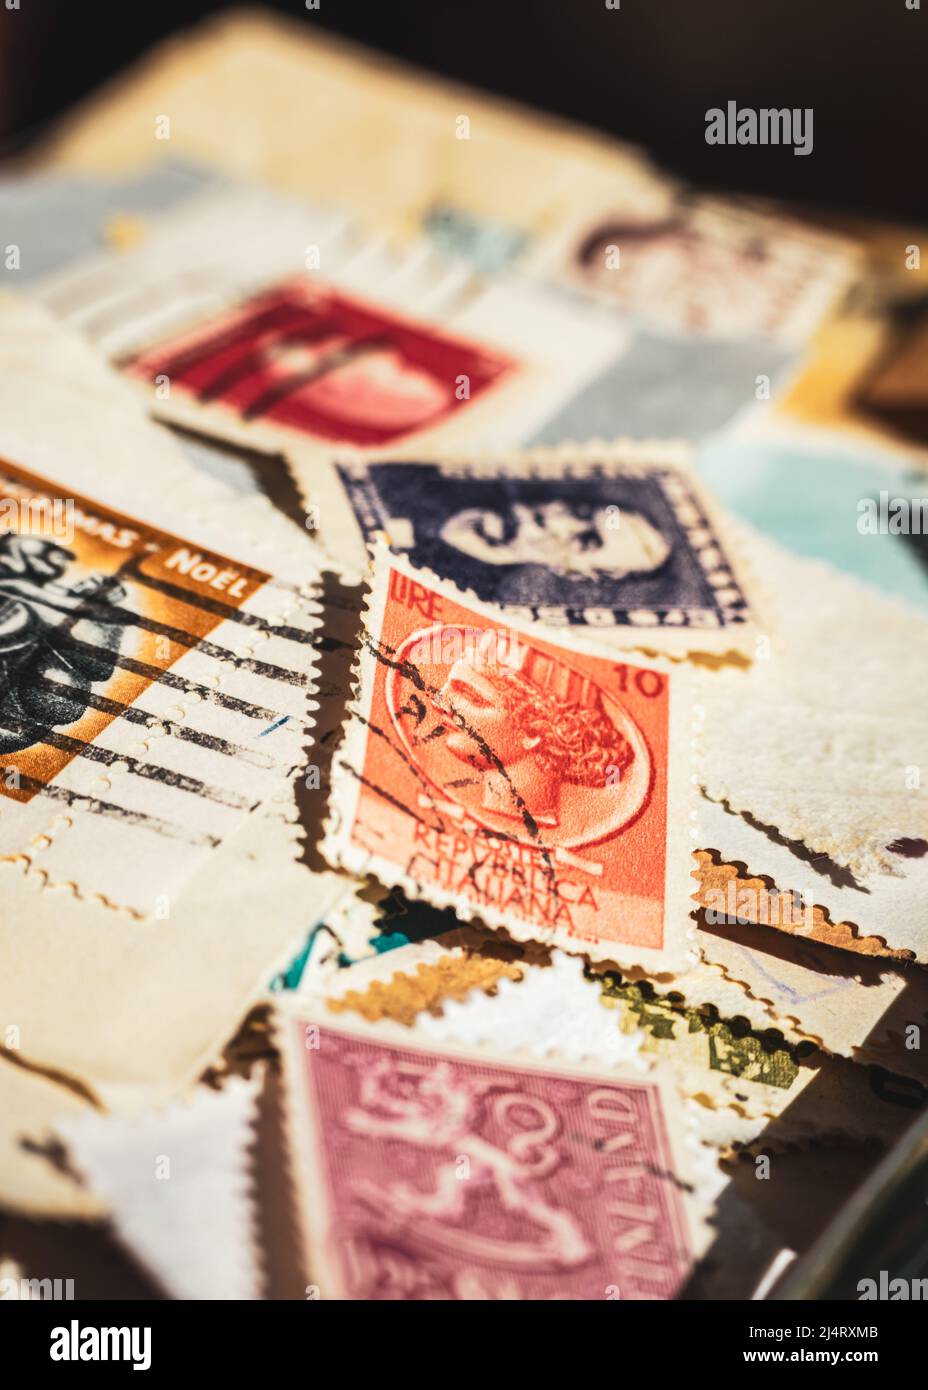 A vertical image of a collection of old postage stamps focused on an orange Italian stamp Stock Photo